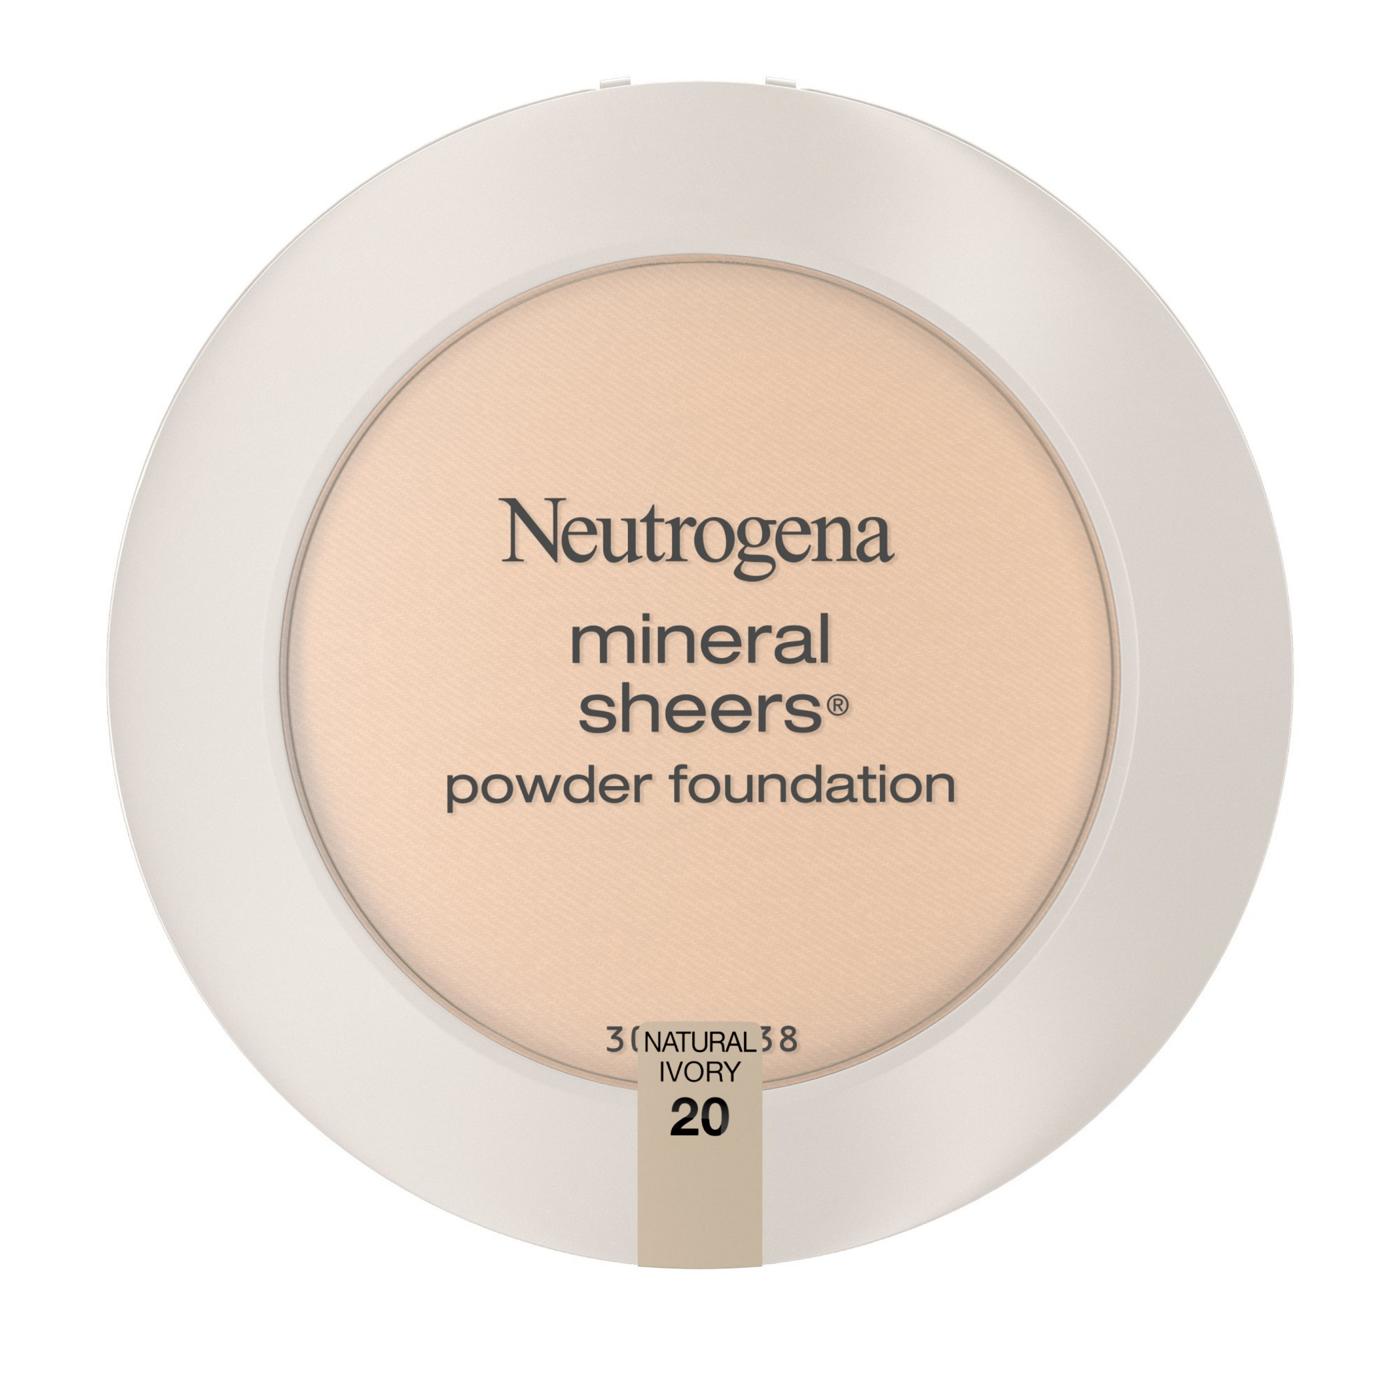 Neutrogena Mineral Sheers Compact Powder Foundation 20 Natural Ivory; image 1 of 6